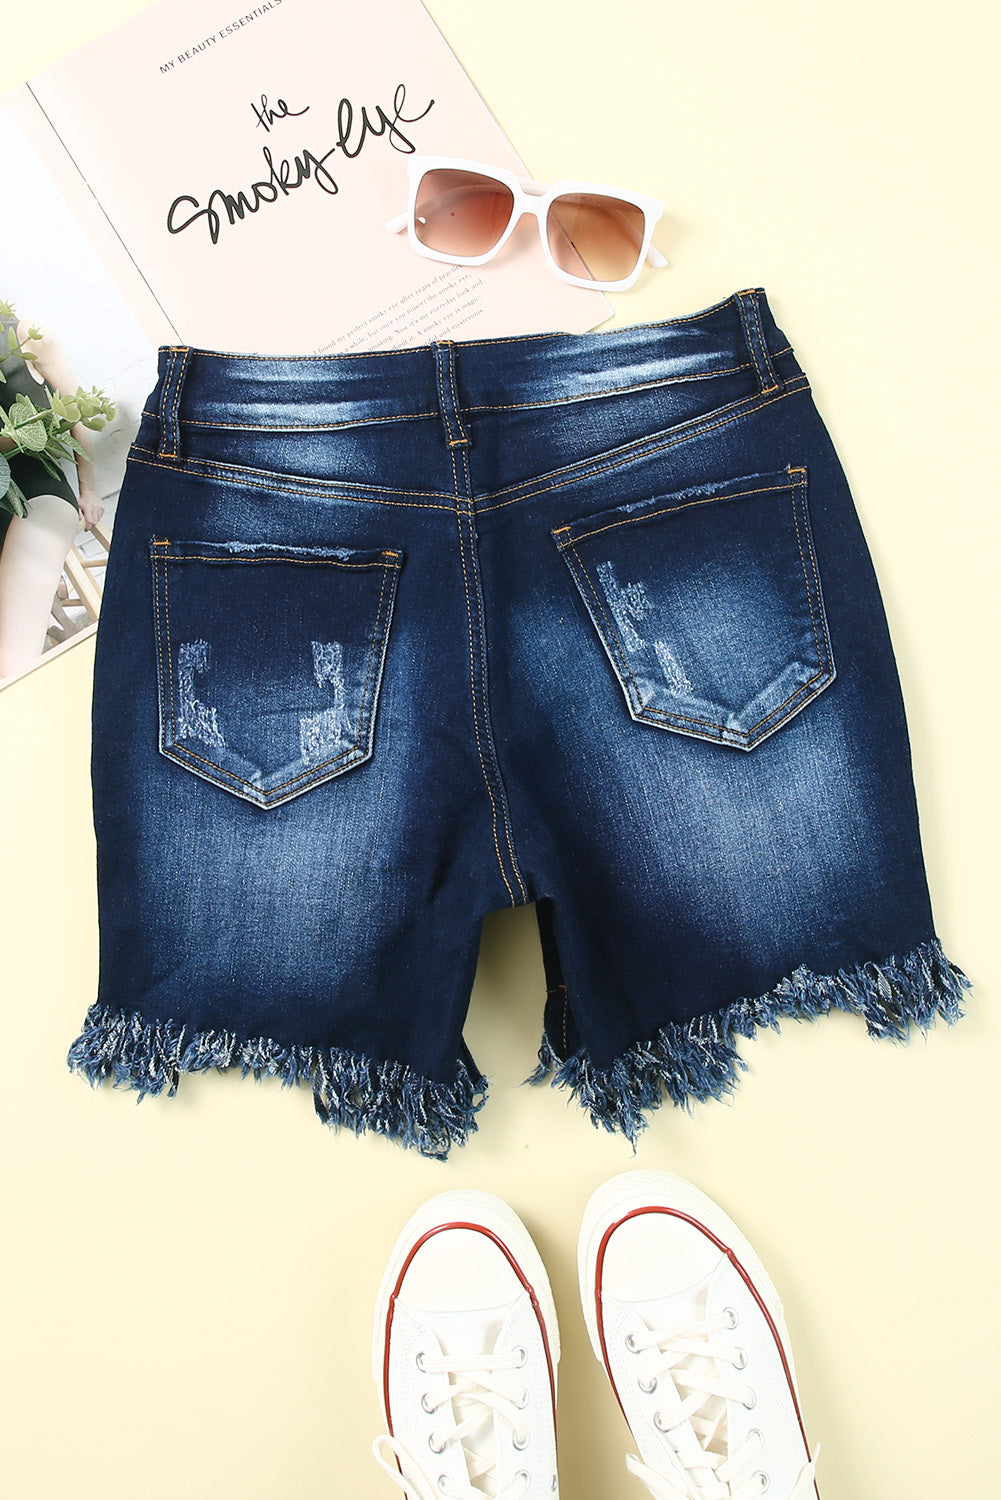 Blaue Skinny-Fit-Jeansshorts im Distressed-Look mit hoher Taille